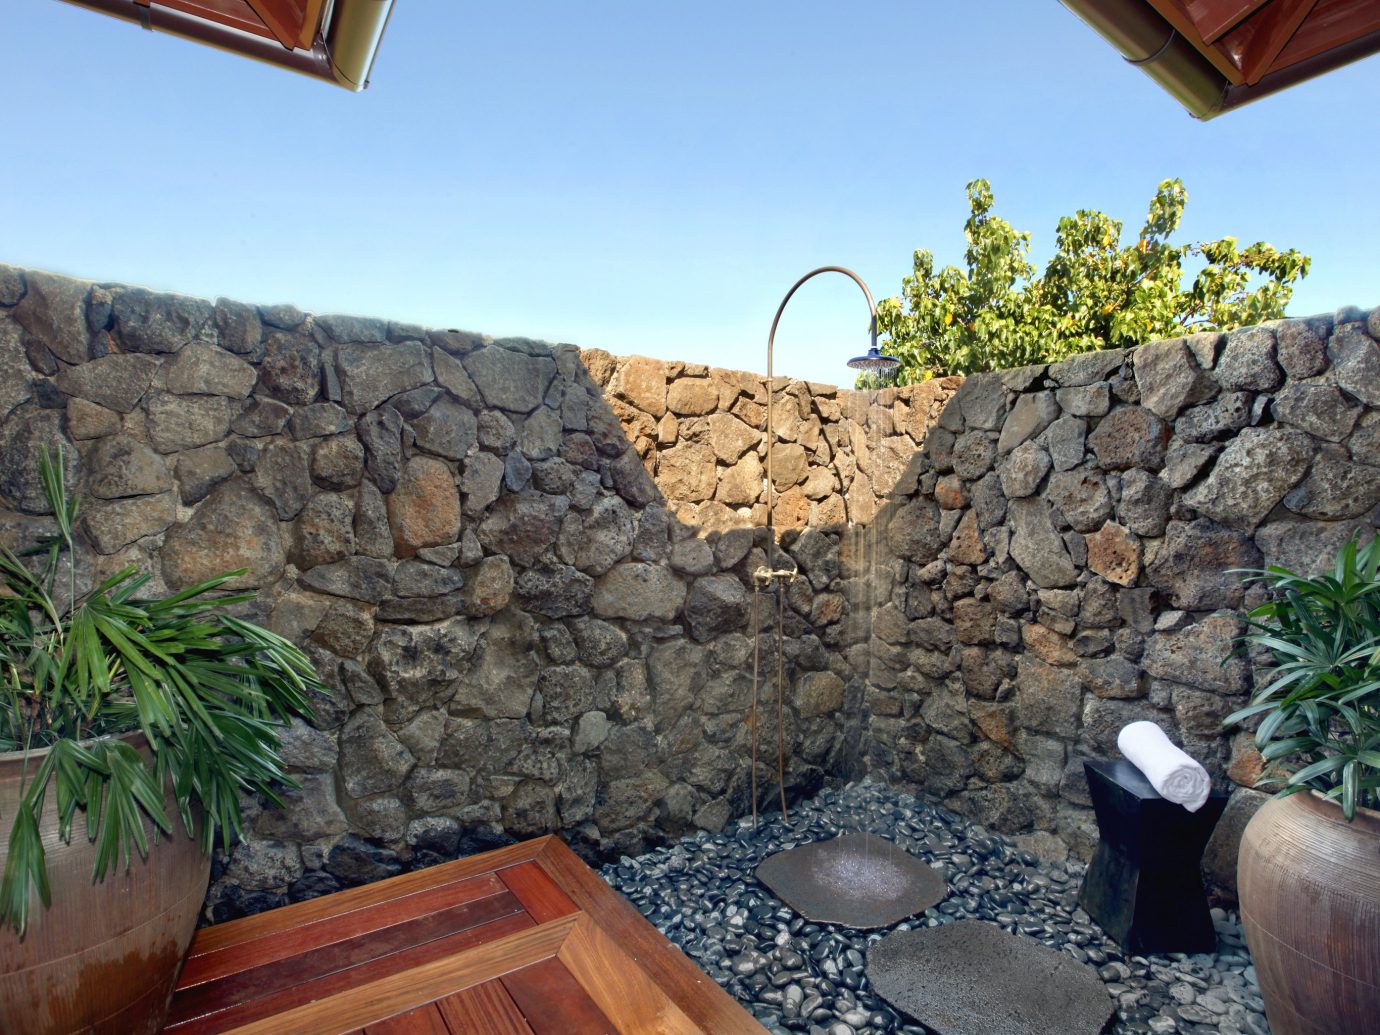 Hotels outdoor shower Outdoors private Romance Tropical water rock wall stone sky property vacation brick landscape backyard Garden